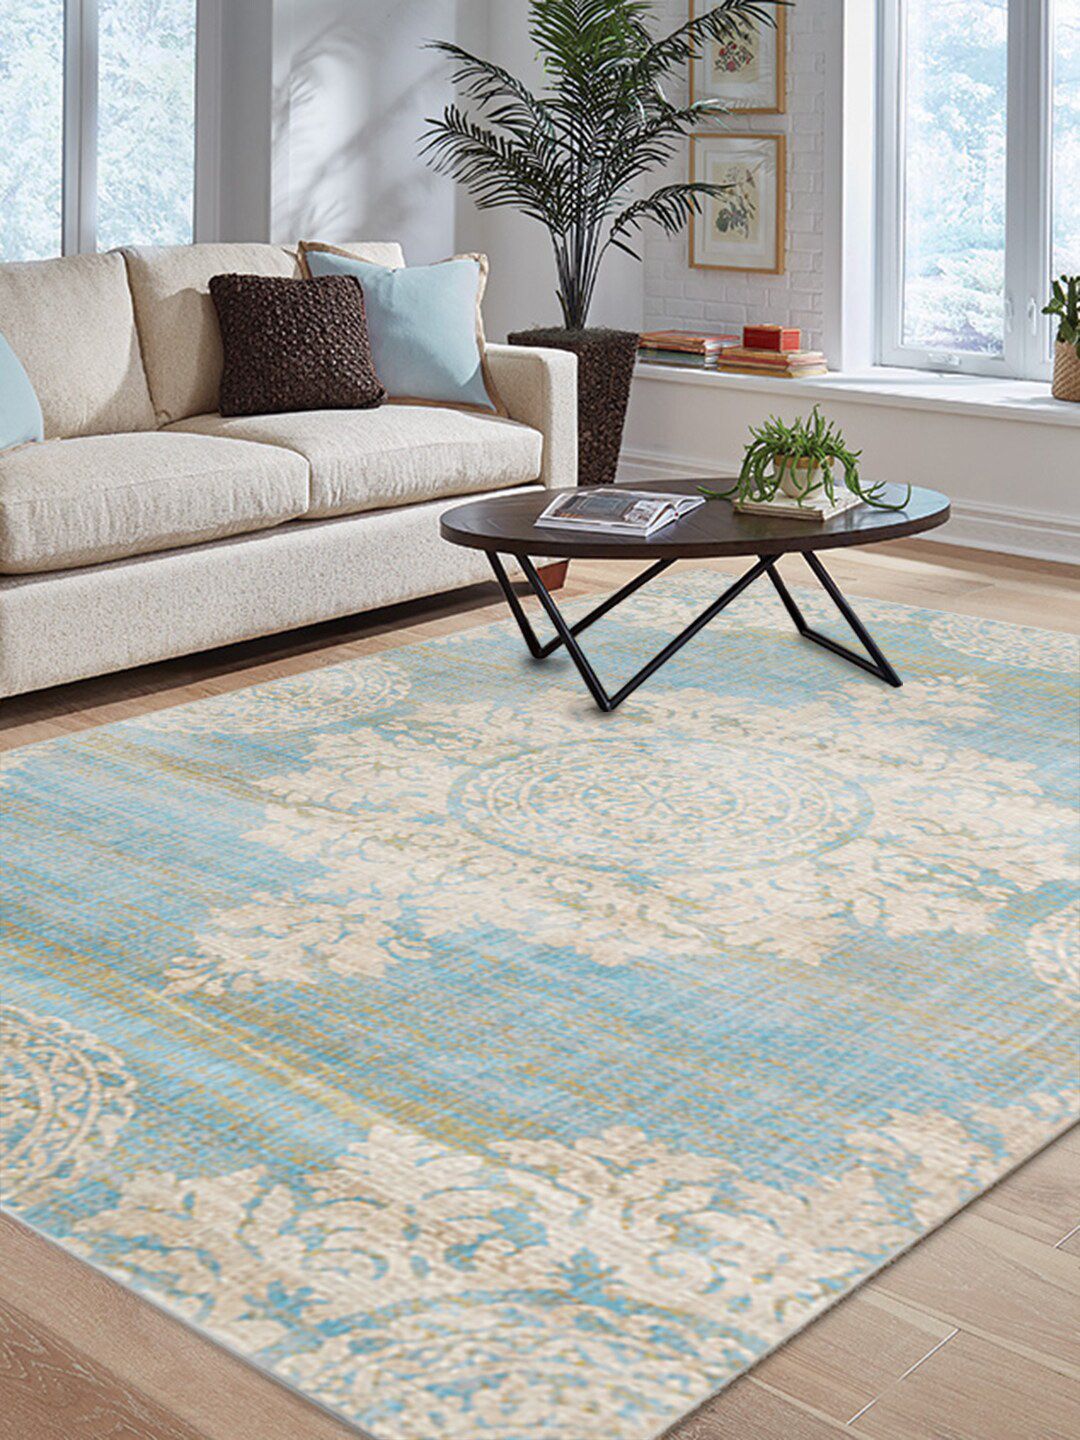 DDecor Blue Ethnic Motifs Printed Carpets Price in India